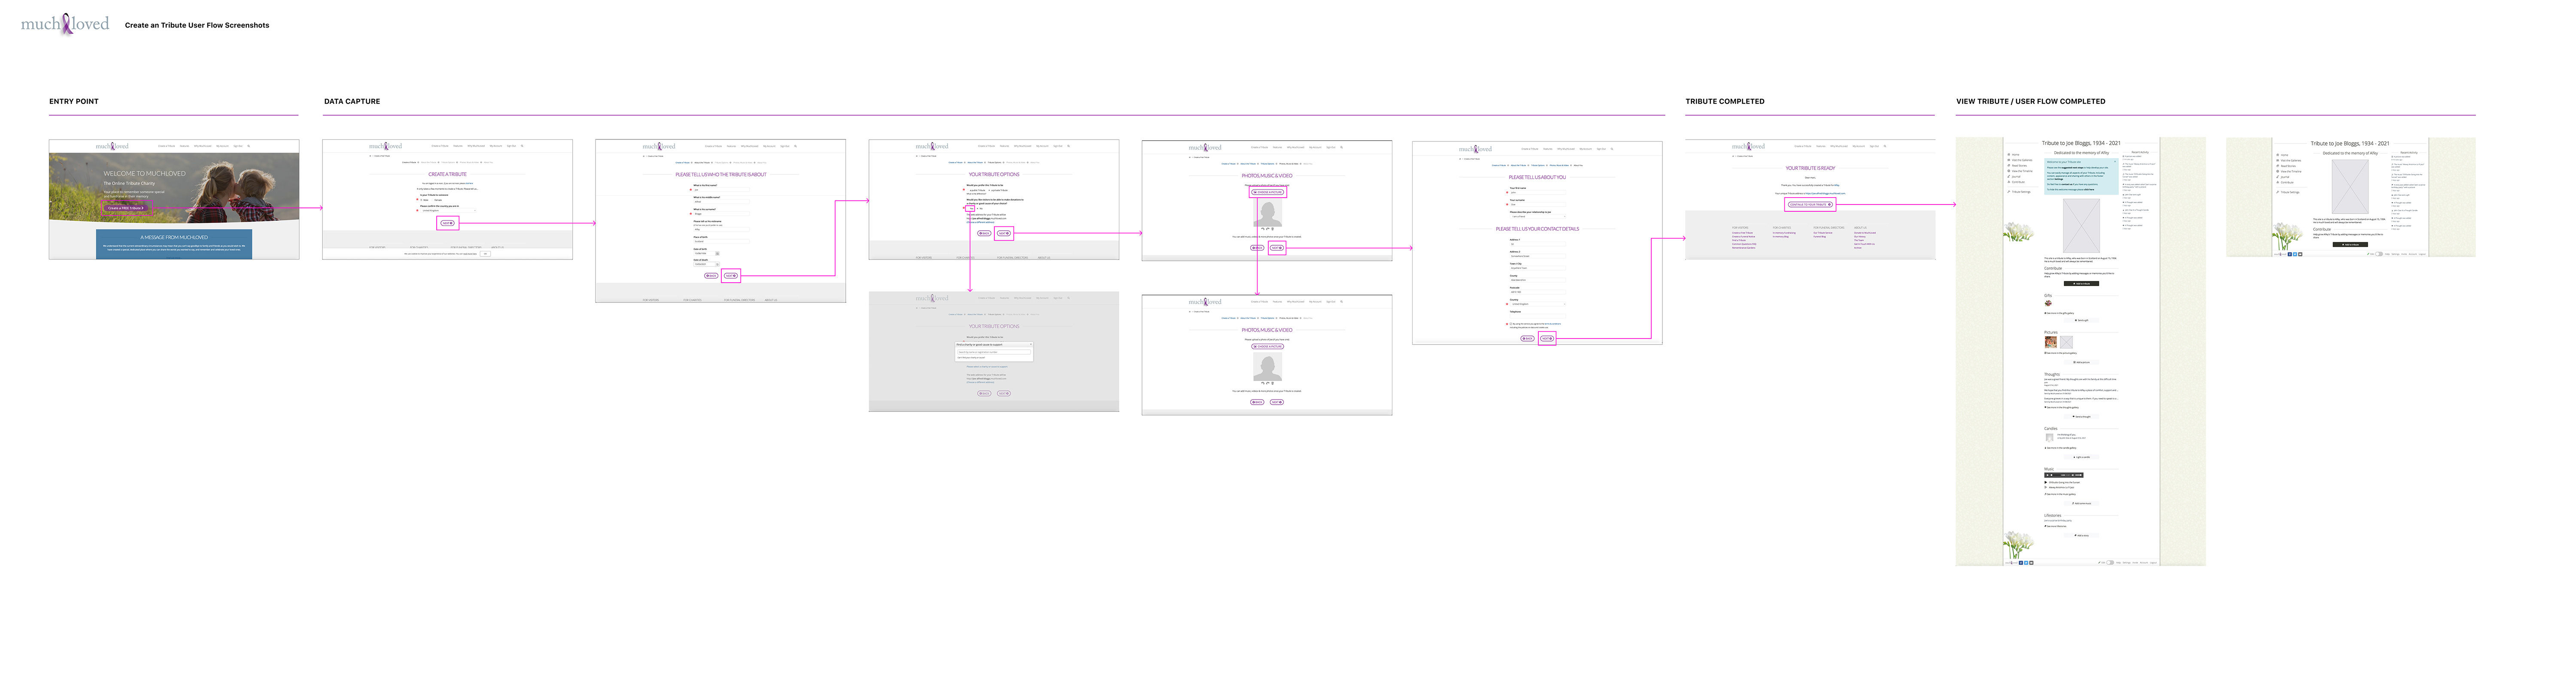 Screenshots of the Much Loved site as a user flow